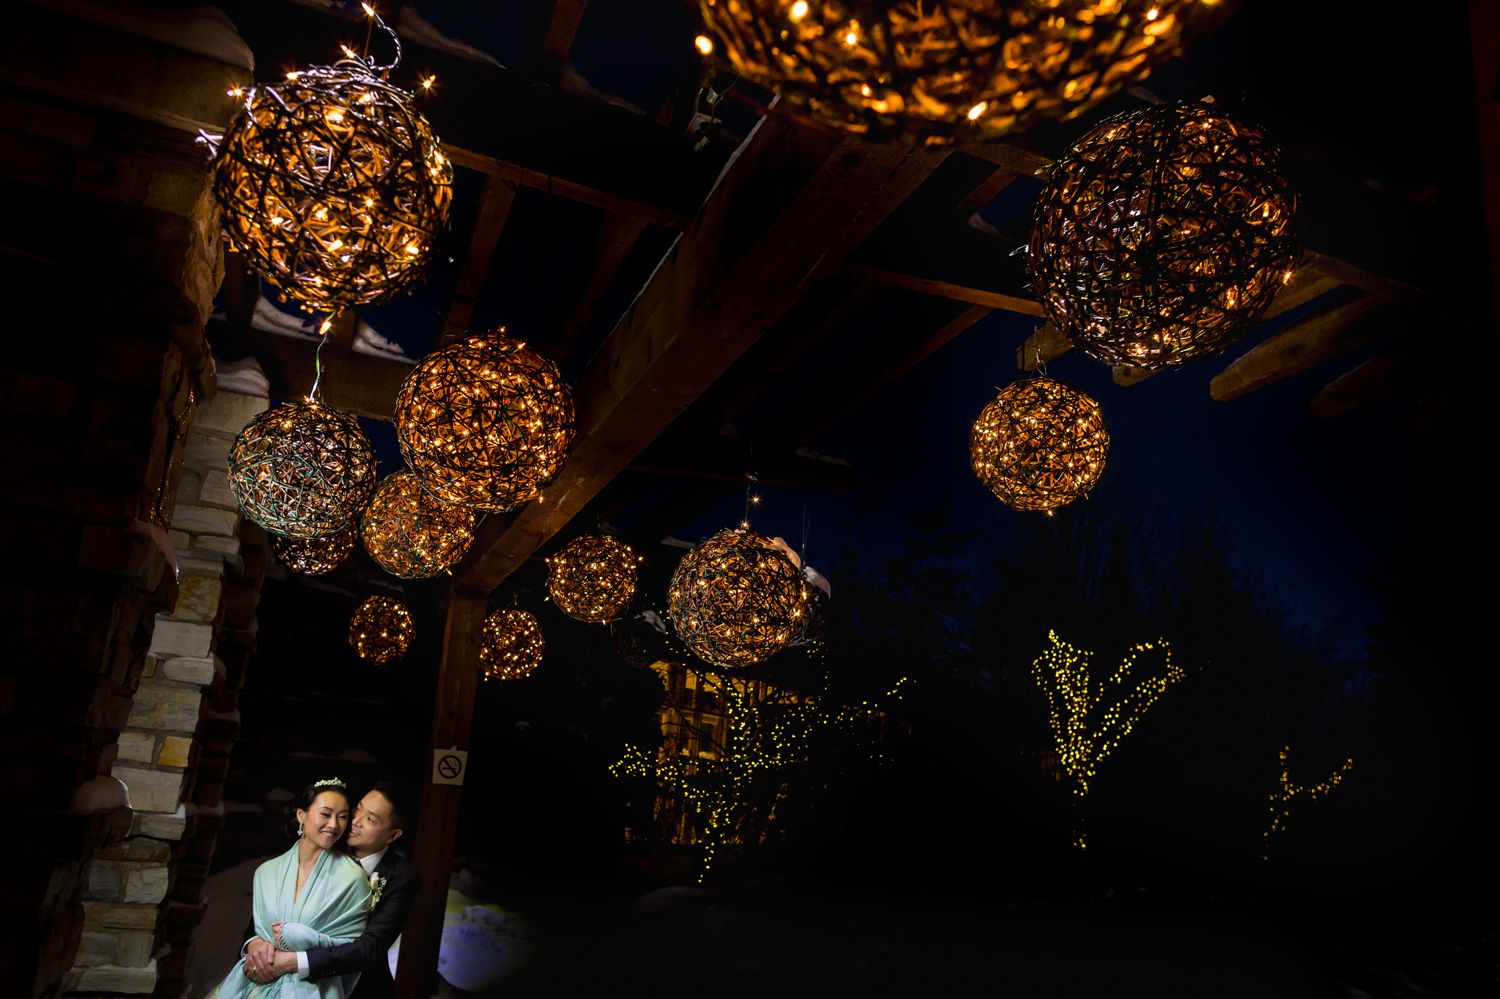 A night-time portrait of the bride and groom after their wedding at The Hilton Casino Lac Leamy